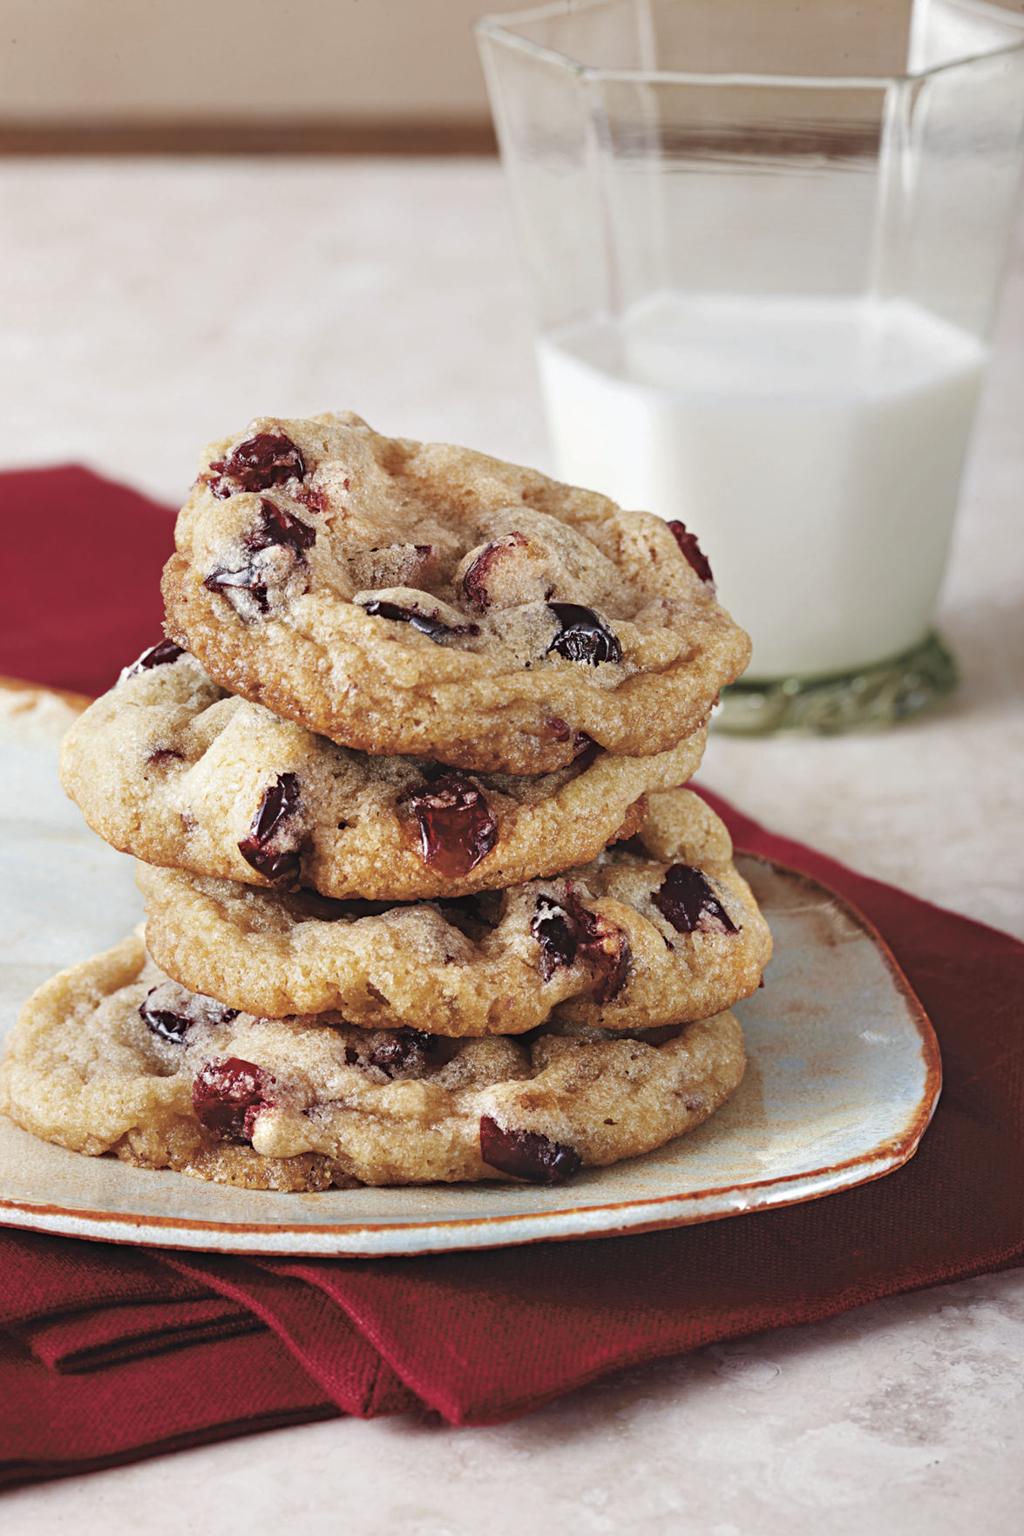 Side Dish: Cookies worth swapping fill new cookbook, Entertainment/Life